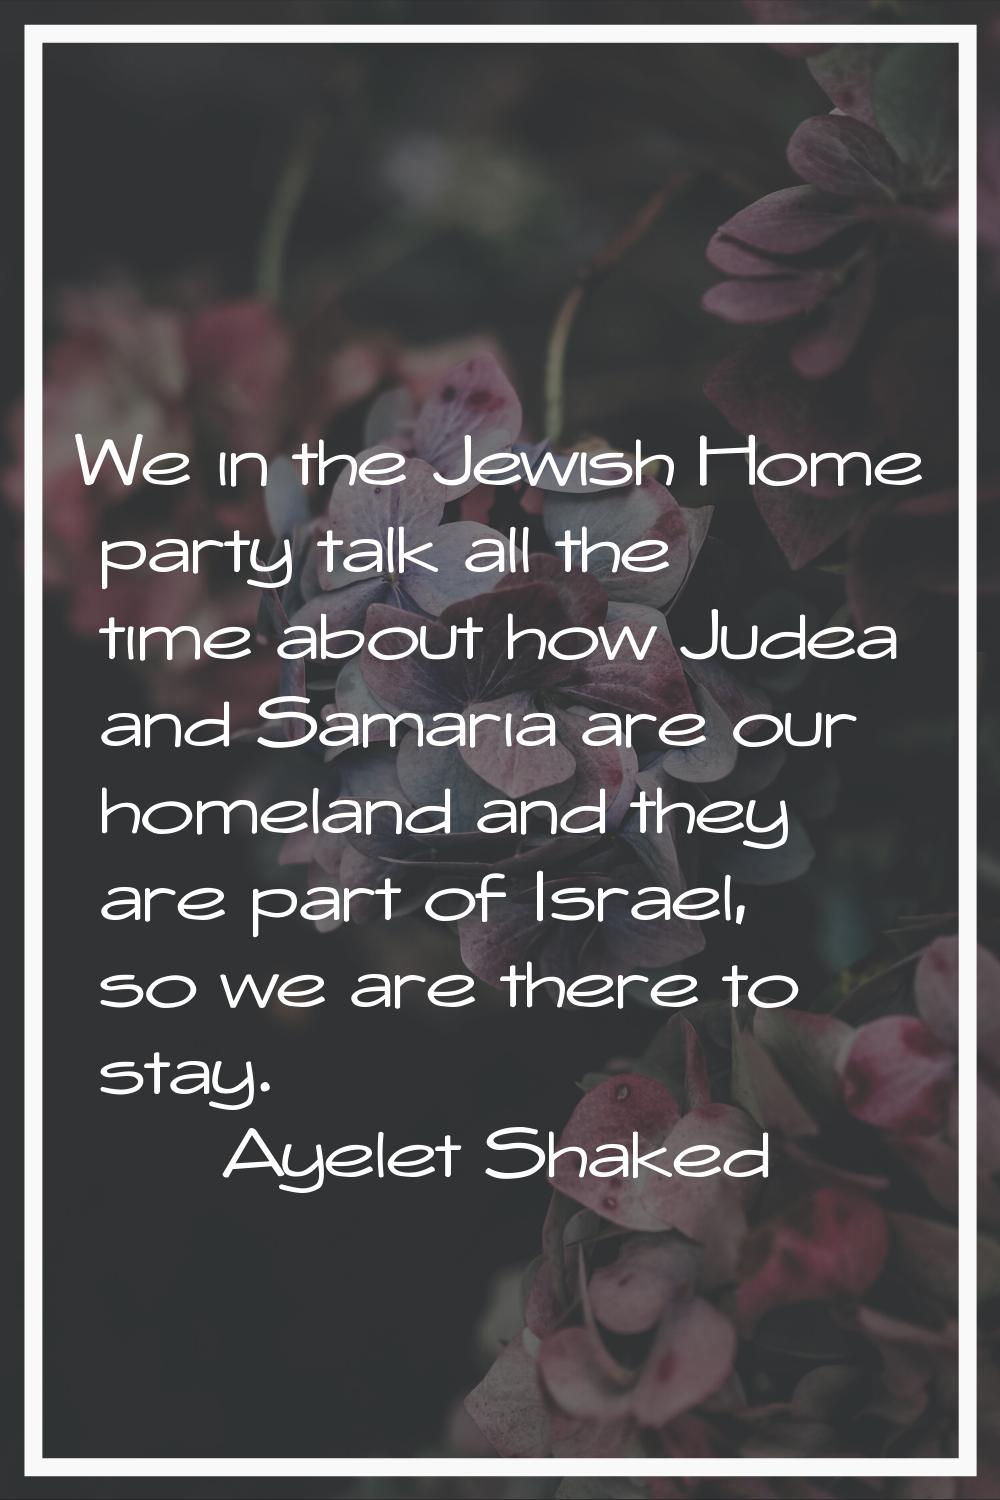 We in the Jewish Home party talk all the time about how Judea and Samaria are our homeland and they